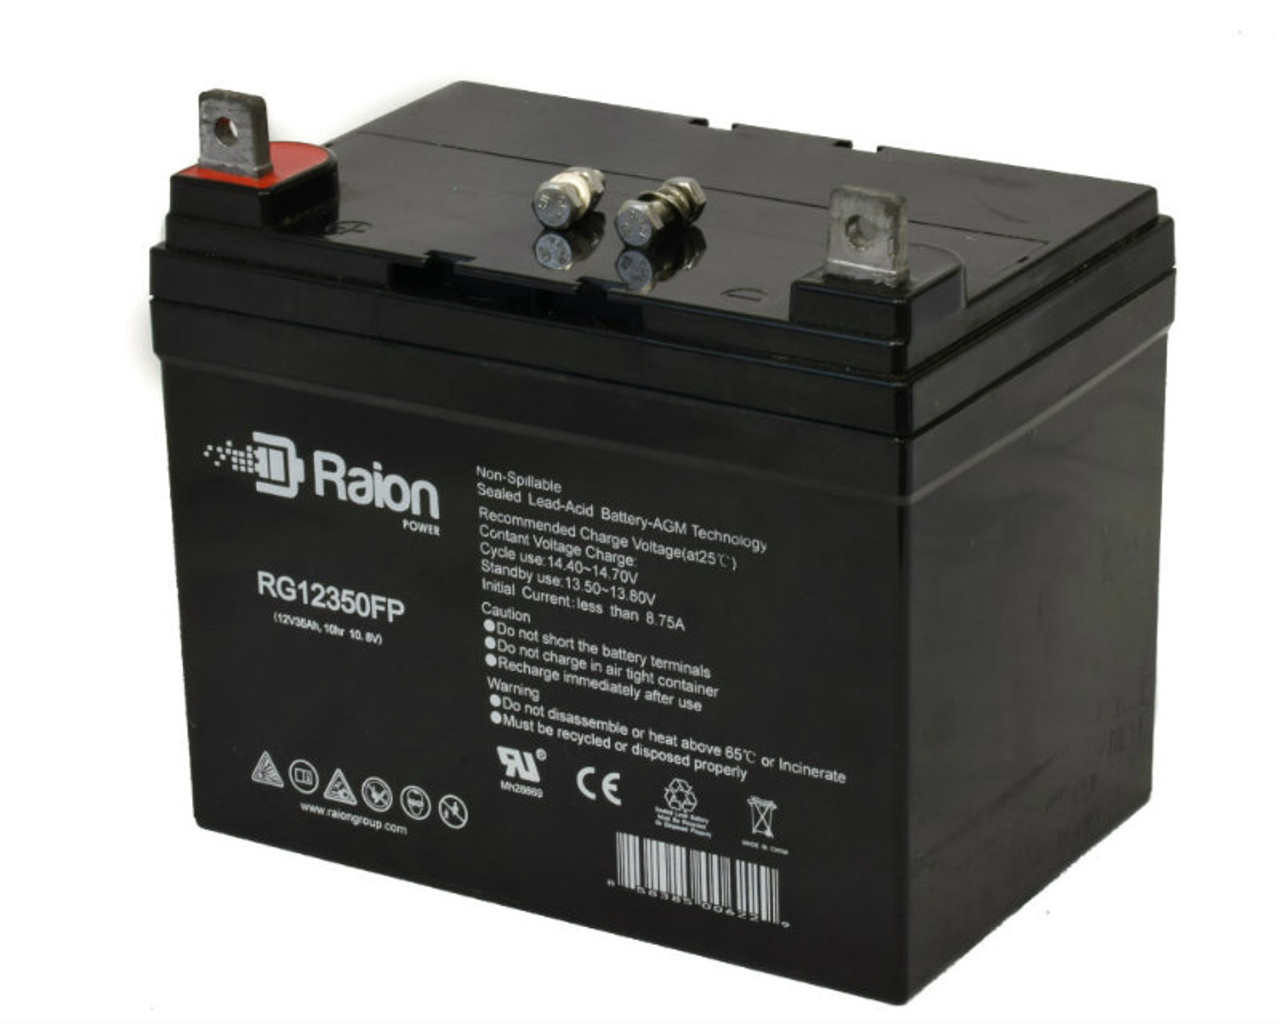 Raion Power Replacement 12V 35Ah RG12350FP Battery for National Battery C33U1